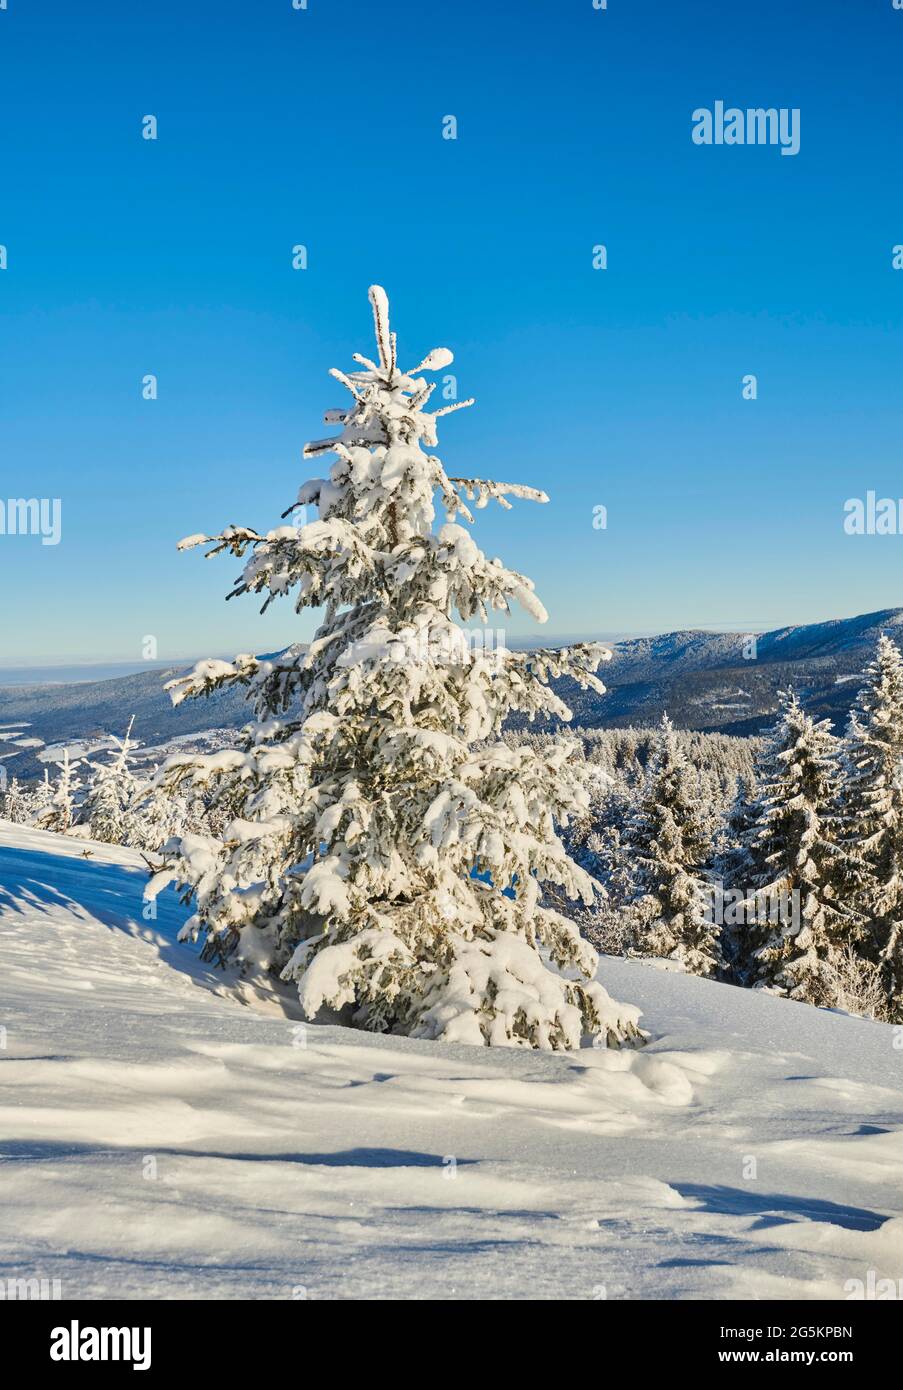 View from Arber on hilly landscape with spruce forest (Picea abies) in winter, Bavarian Forest, Bavaria, Germany, Europe Stock Photo